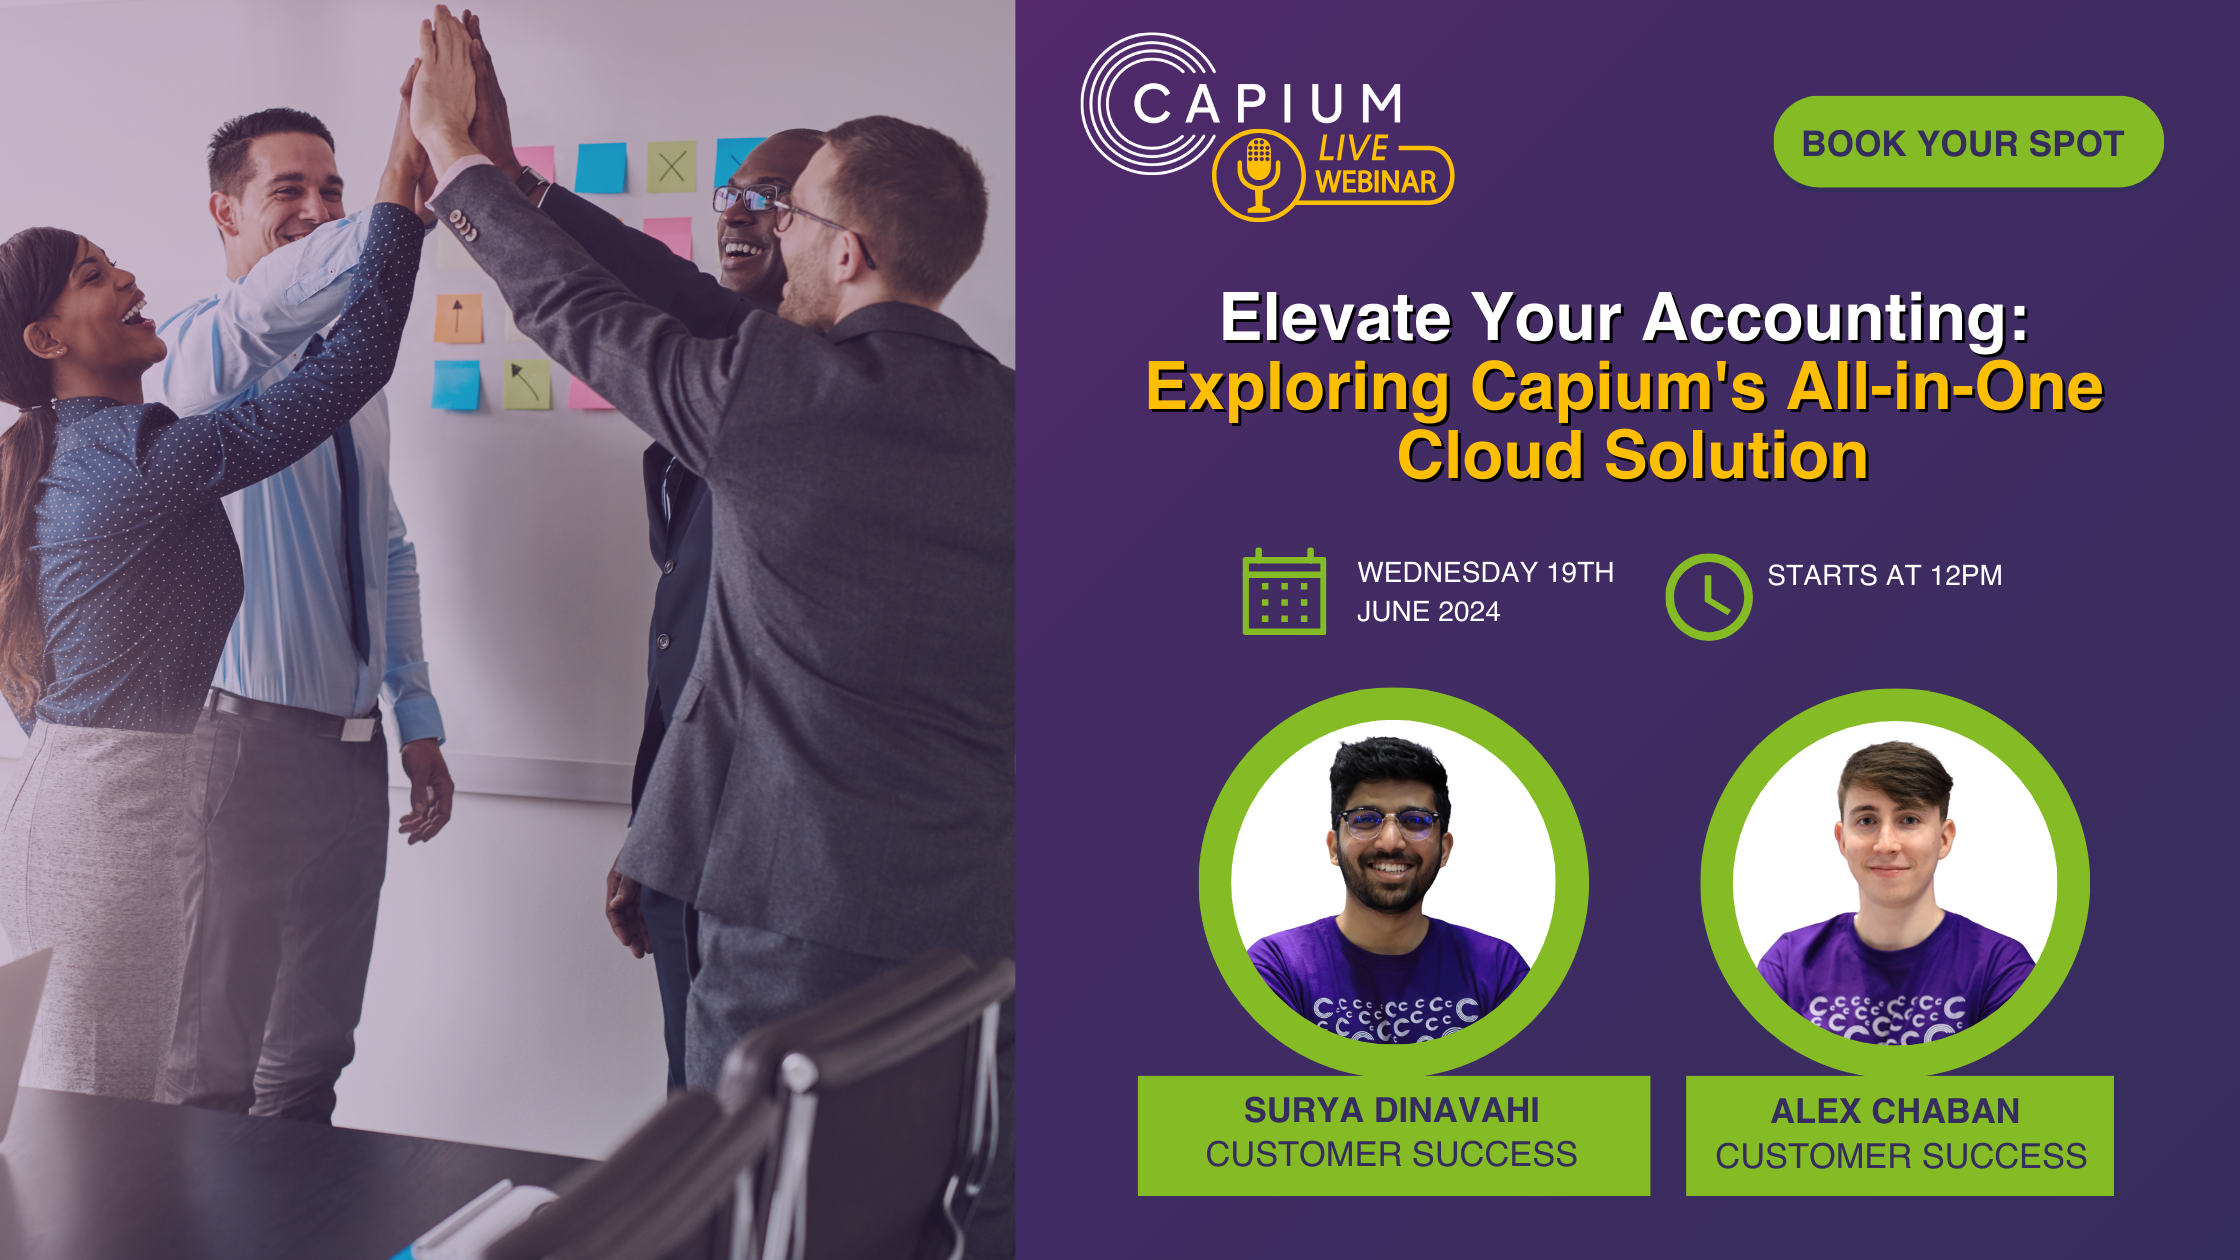 Elevate Your Accounting: Exploring Capium's All-in-One Cloud Solution image